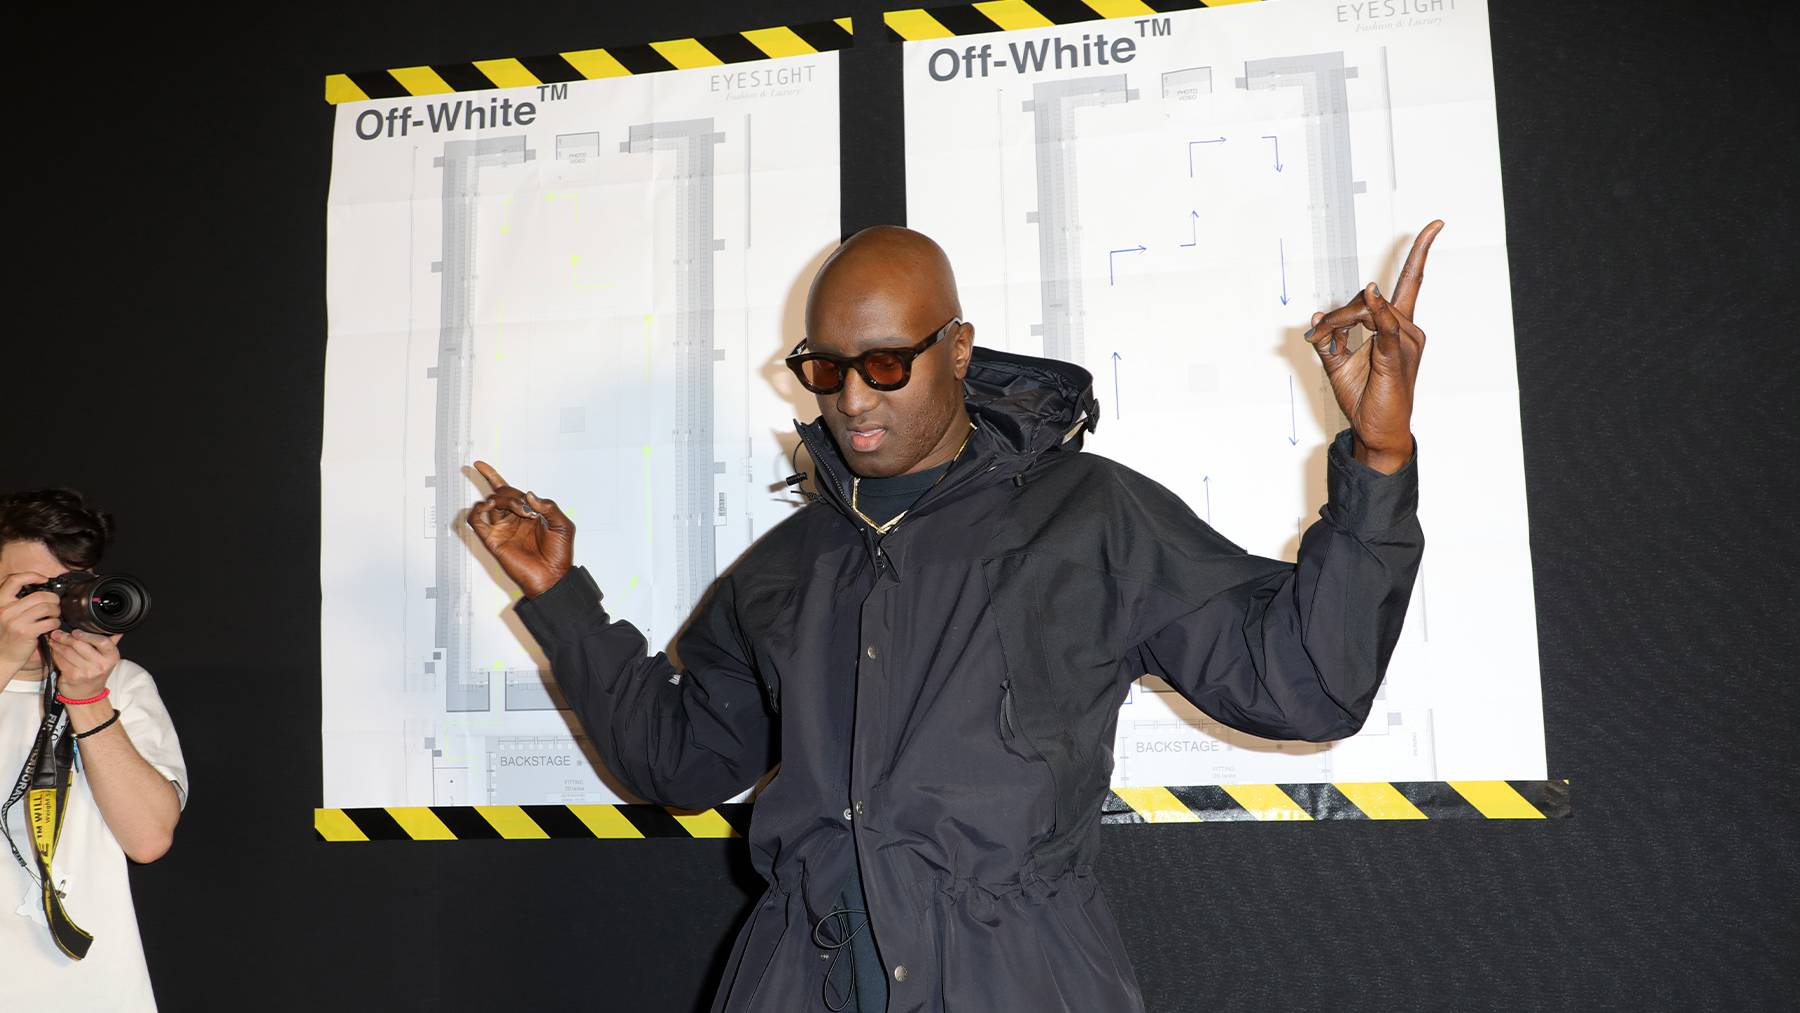 Executives at New Guards Group and LVMH aim to harness the legacy left by the late Virgil Abloh to turn his label Off-White into a multi-billion-dollar brand.